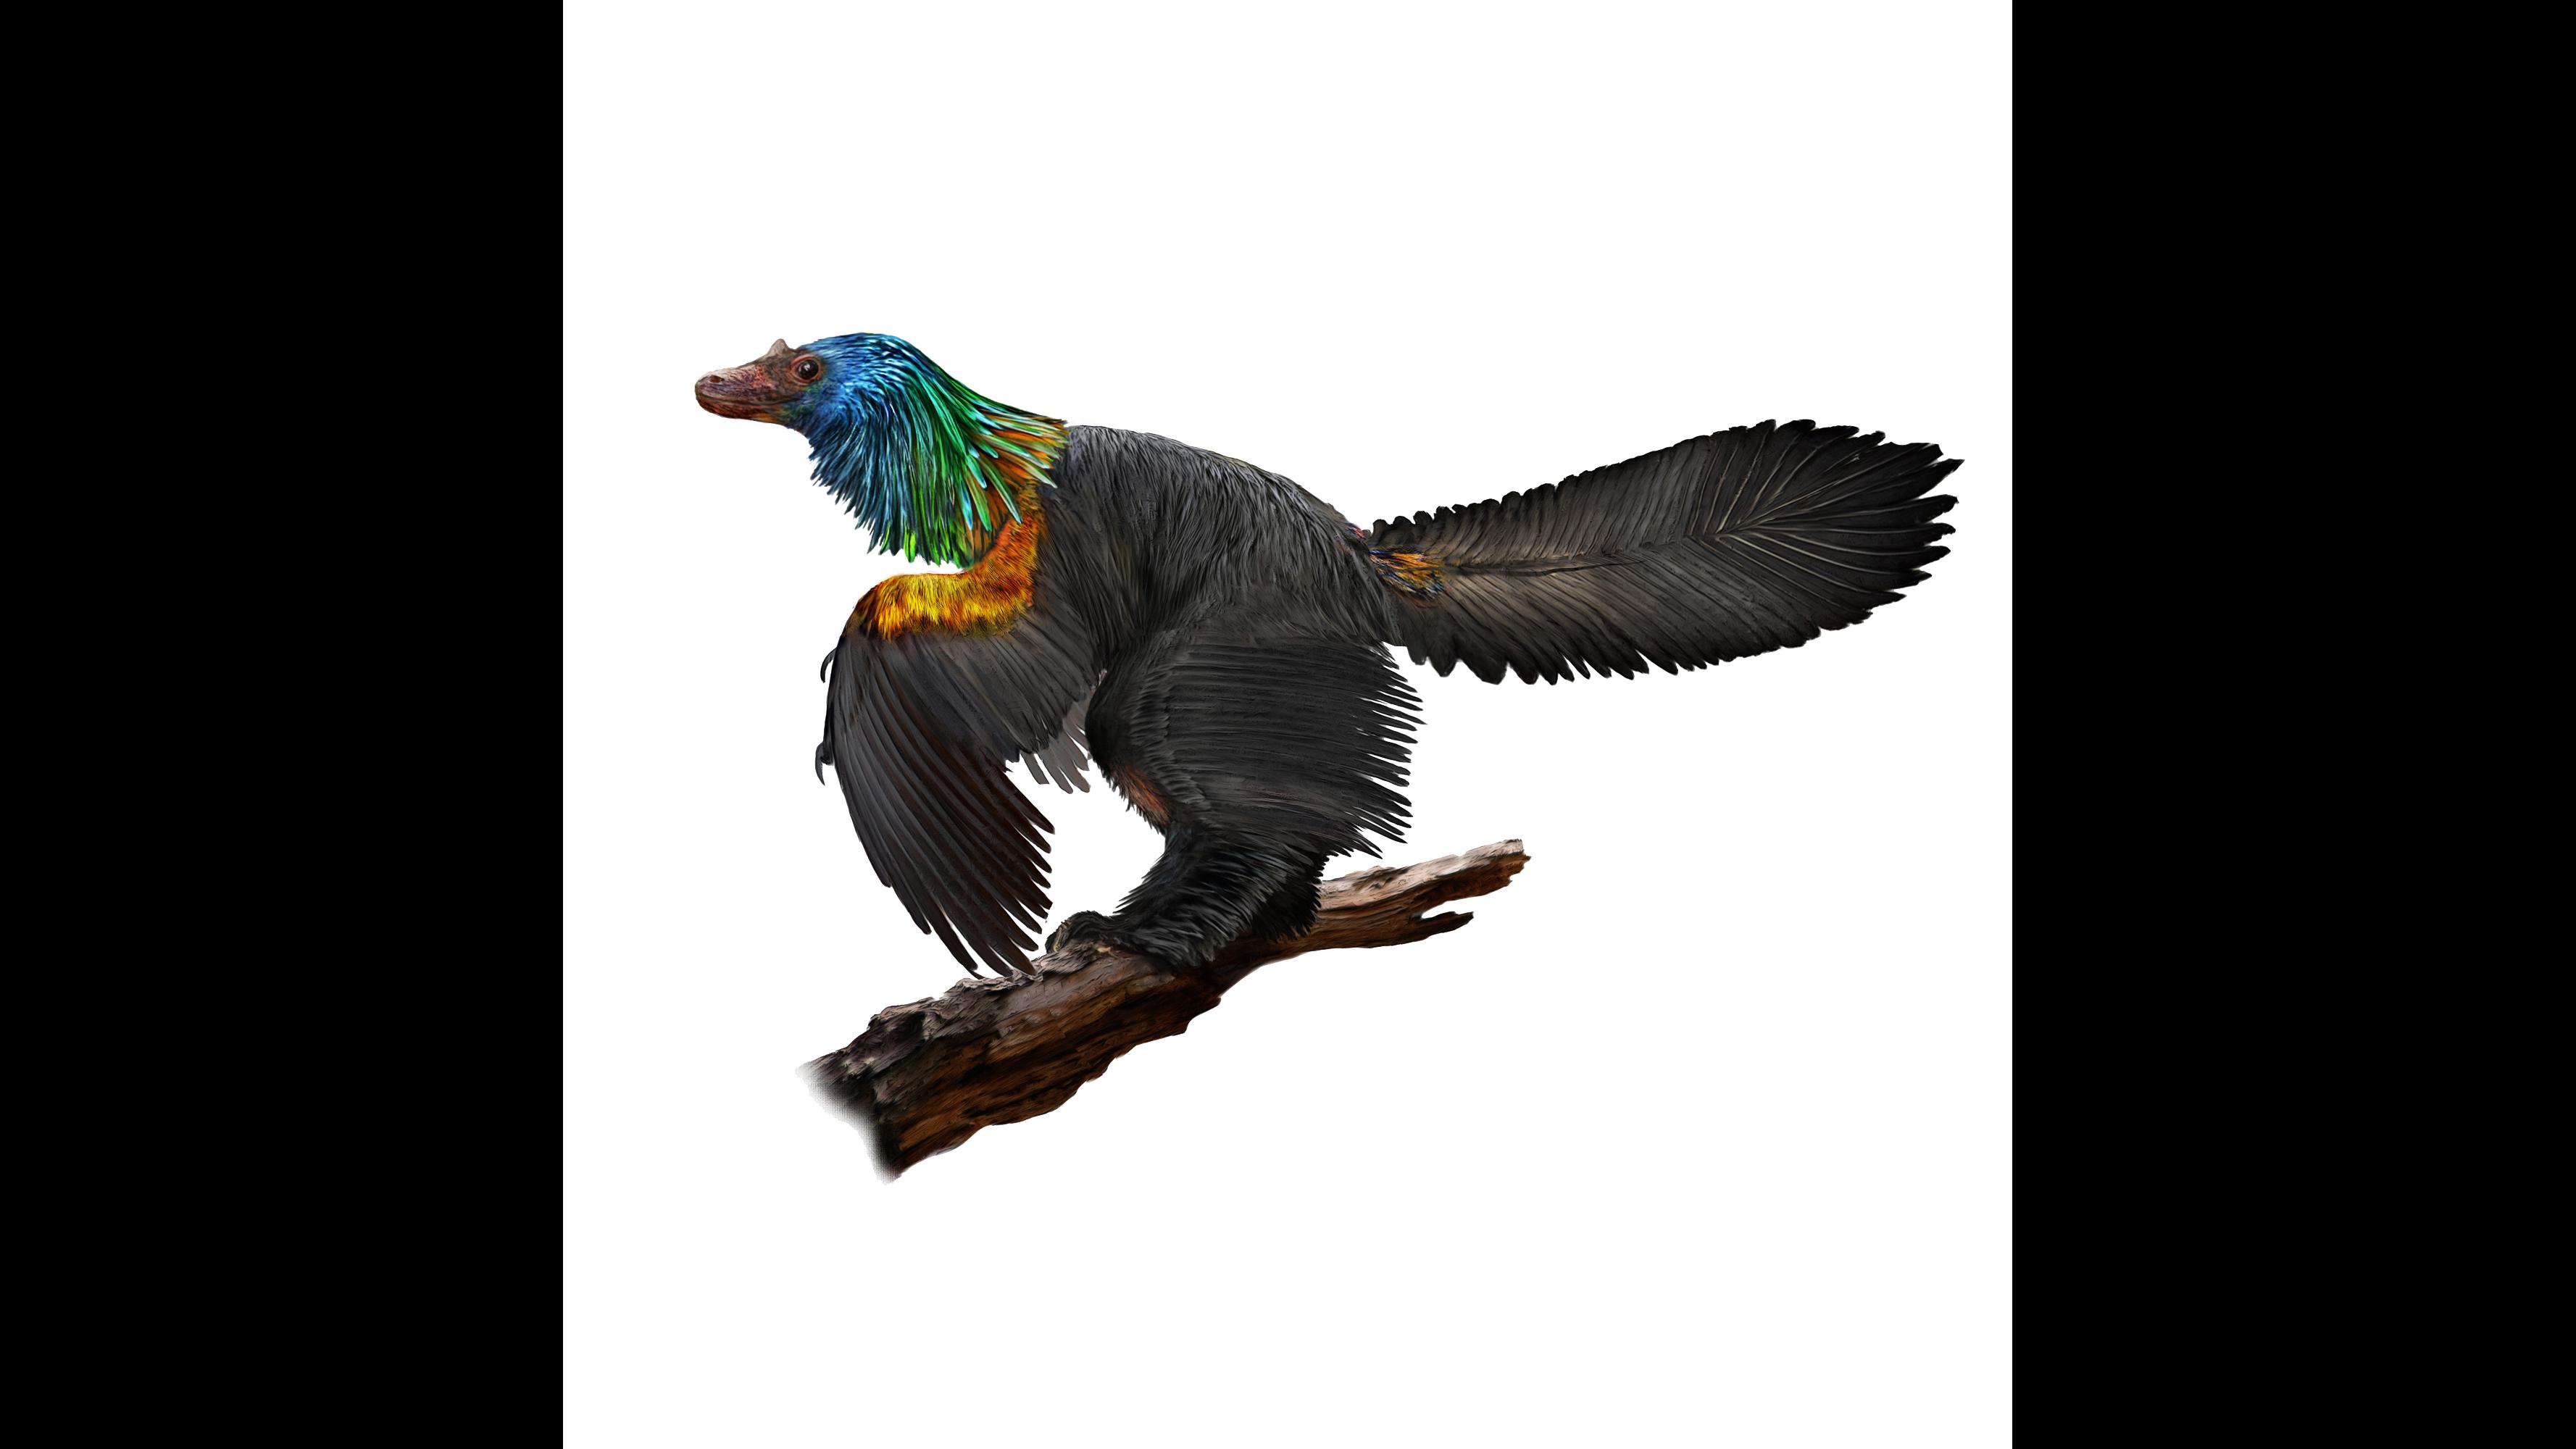 An illustration of Caihong juji, a newly discovered species of dinosaur from 161 million years ago that featured rainbow-colored feathers. (Illustration by Velizar Simeonovski / The Field Museum for UT Austin Jackson School of Geosciences)